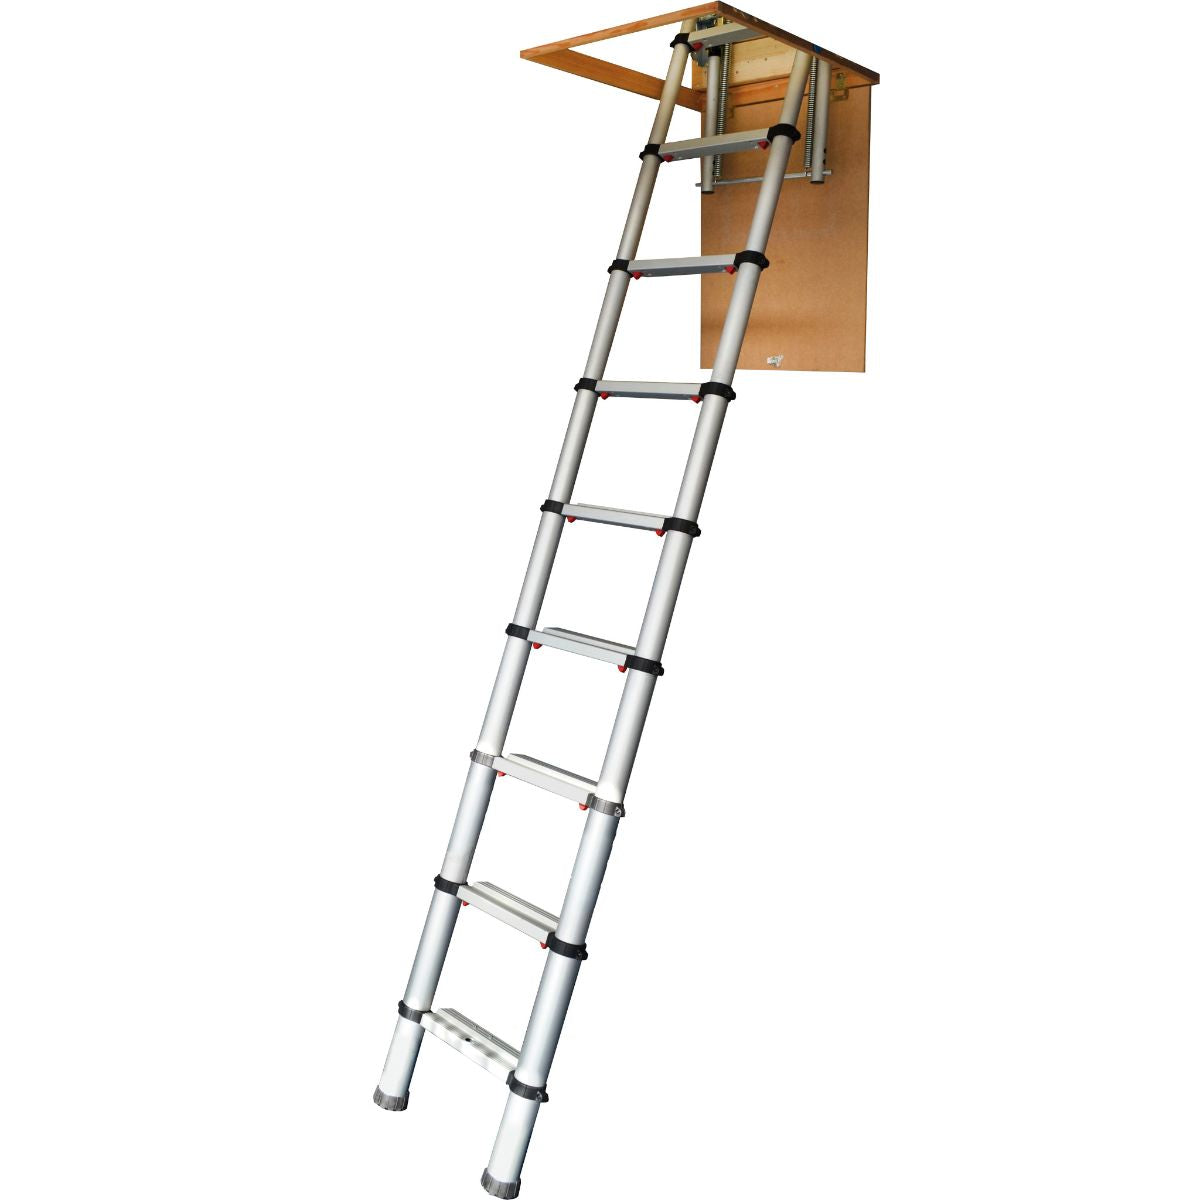 Zarges Telescopic Ladder 2.9m - Ladders & Access